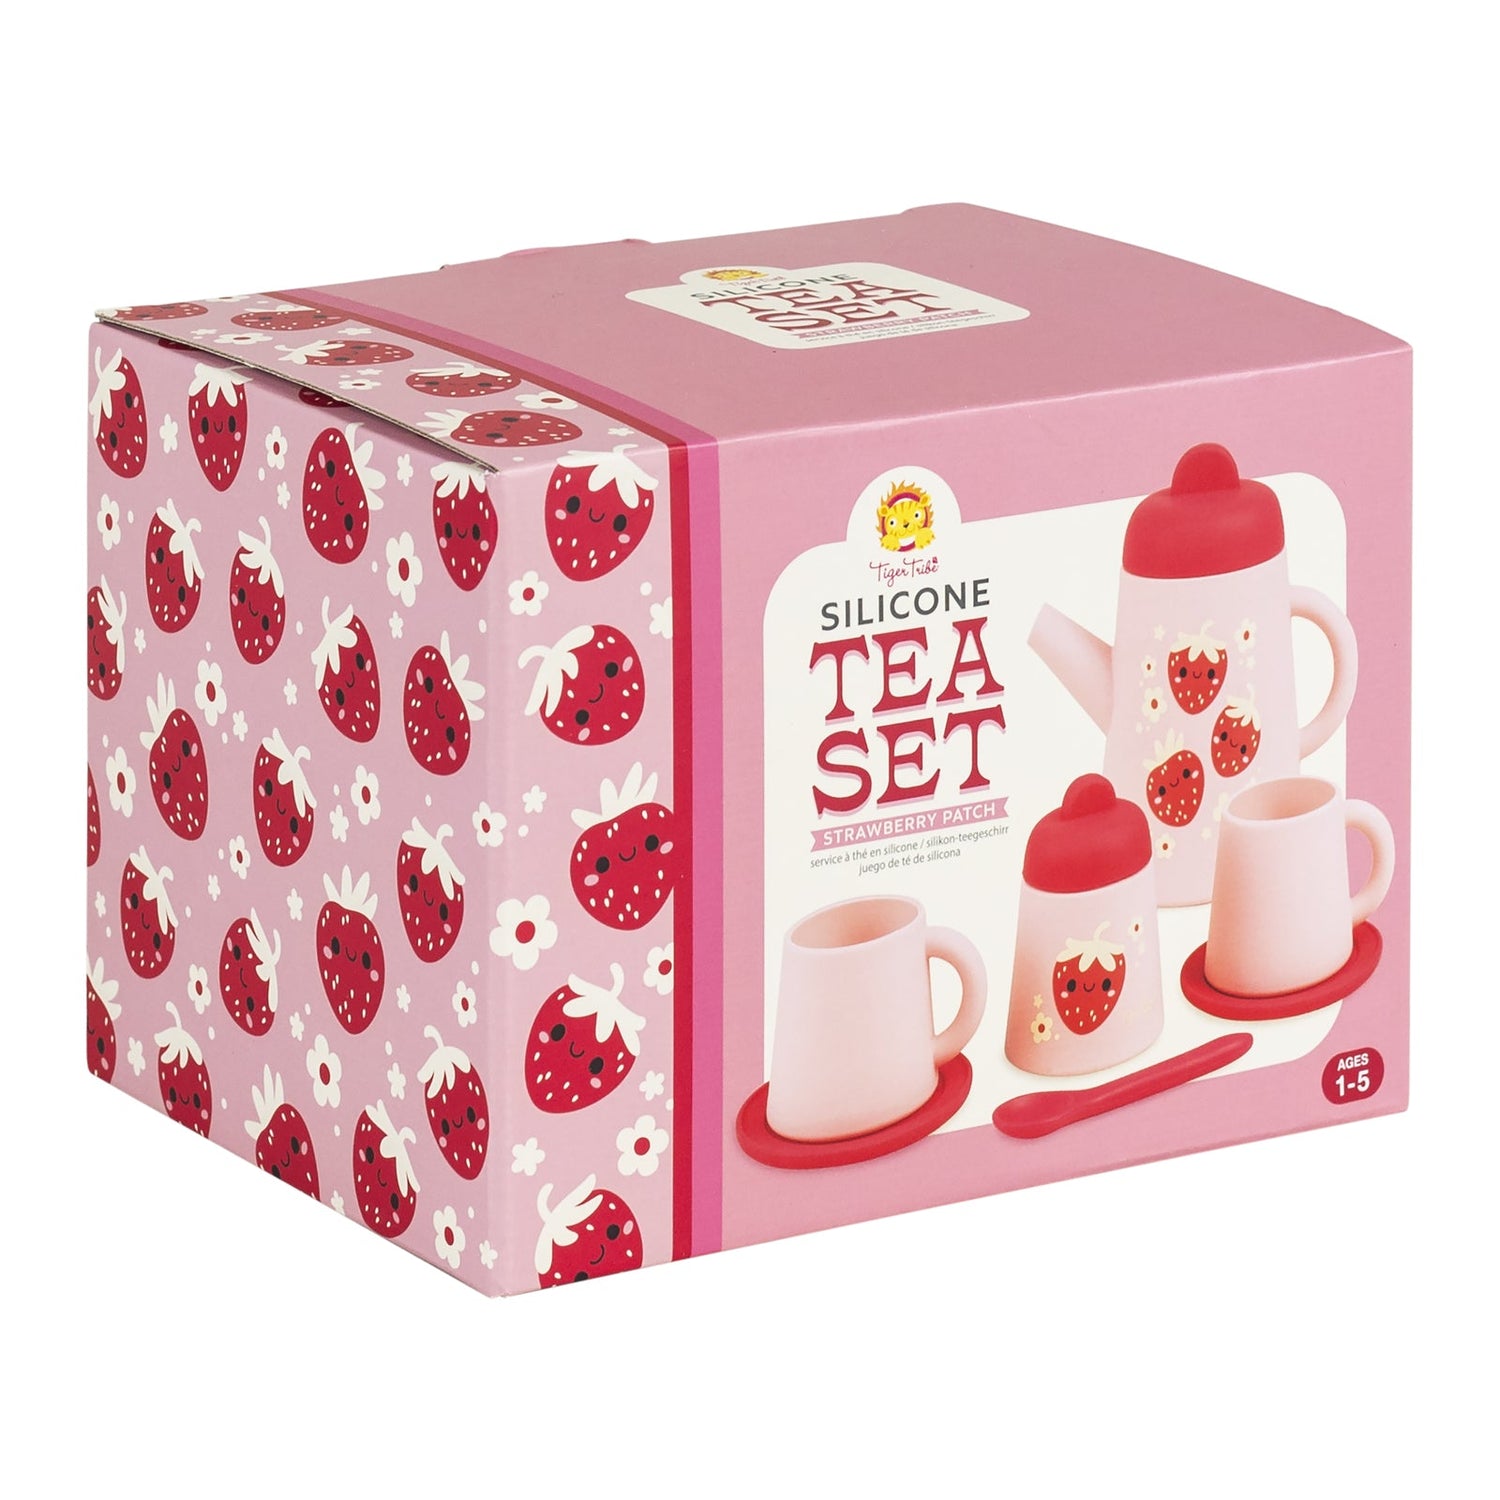 TIGER TRIBE | SILICONE TEA SET - STRAWBERRY PATCH by TIGER TRIBE - The Playful Collective